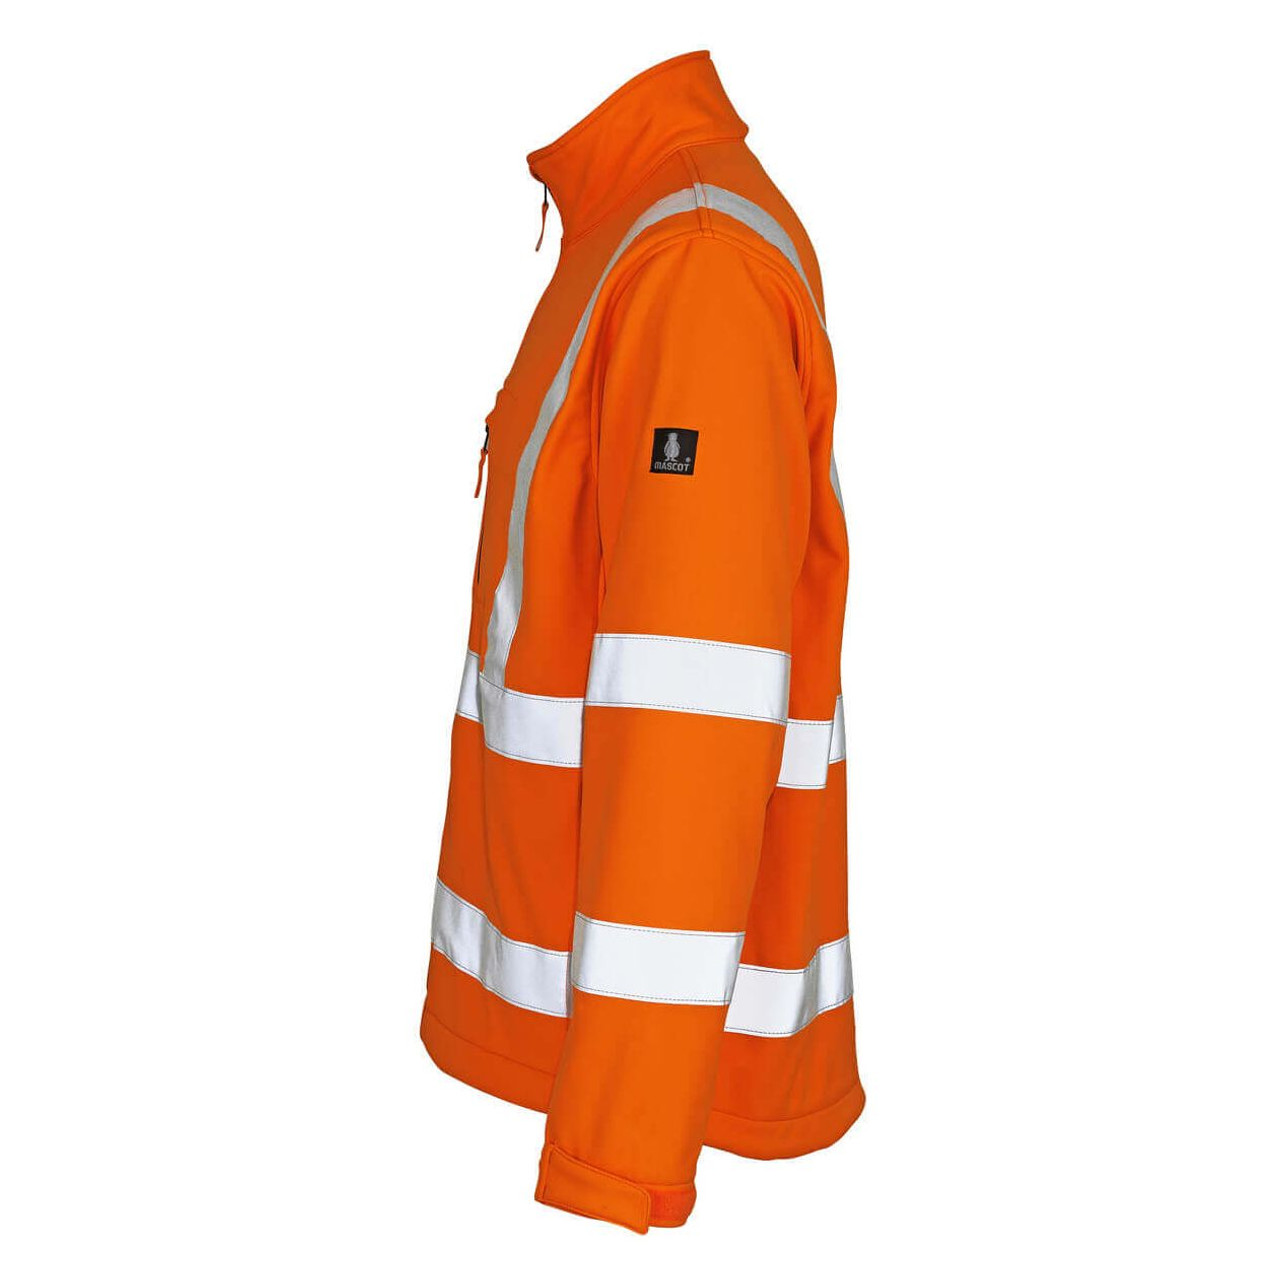 MASCOT Jacket | 08005 High Vis Orange Jacket with Reflective Tape in Softshell